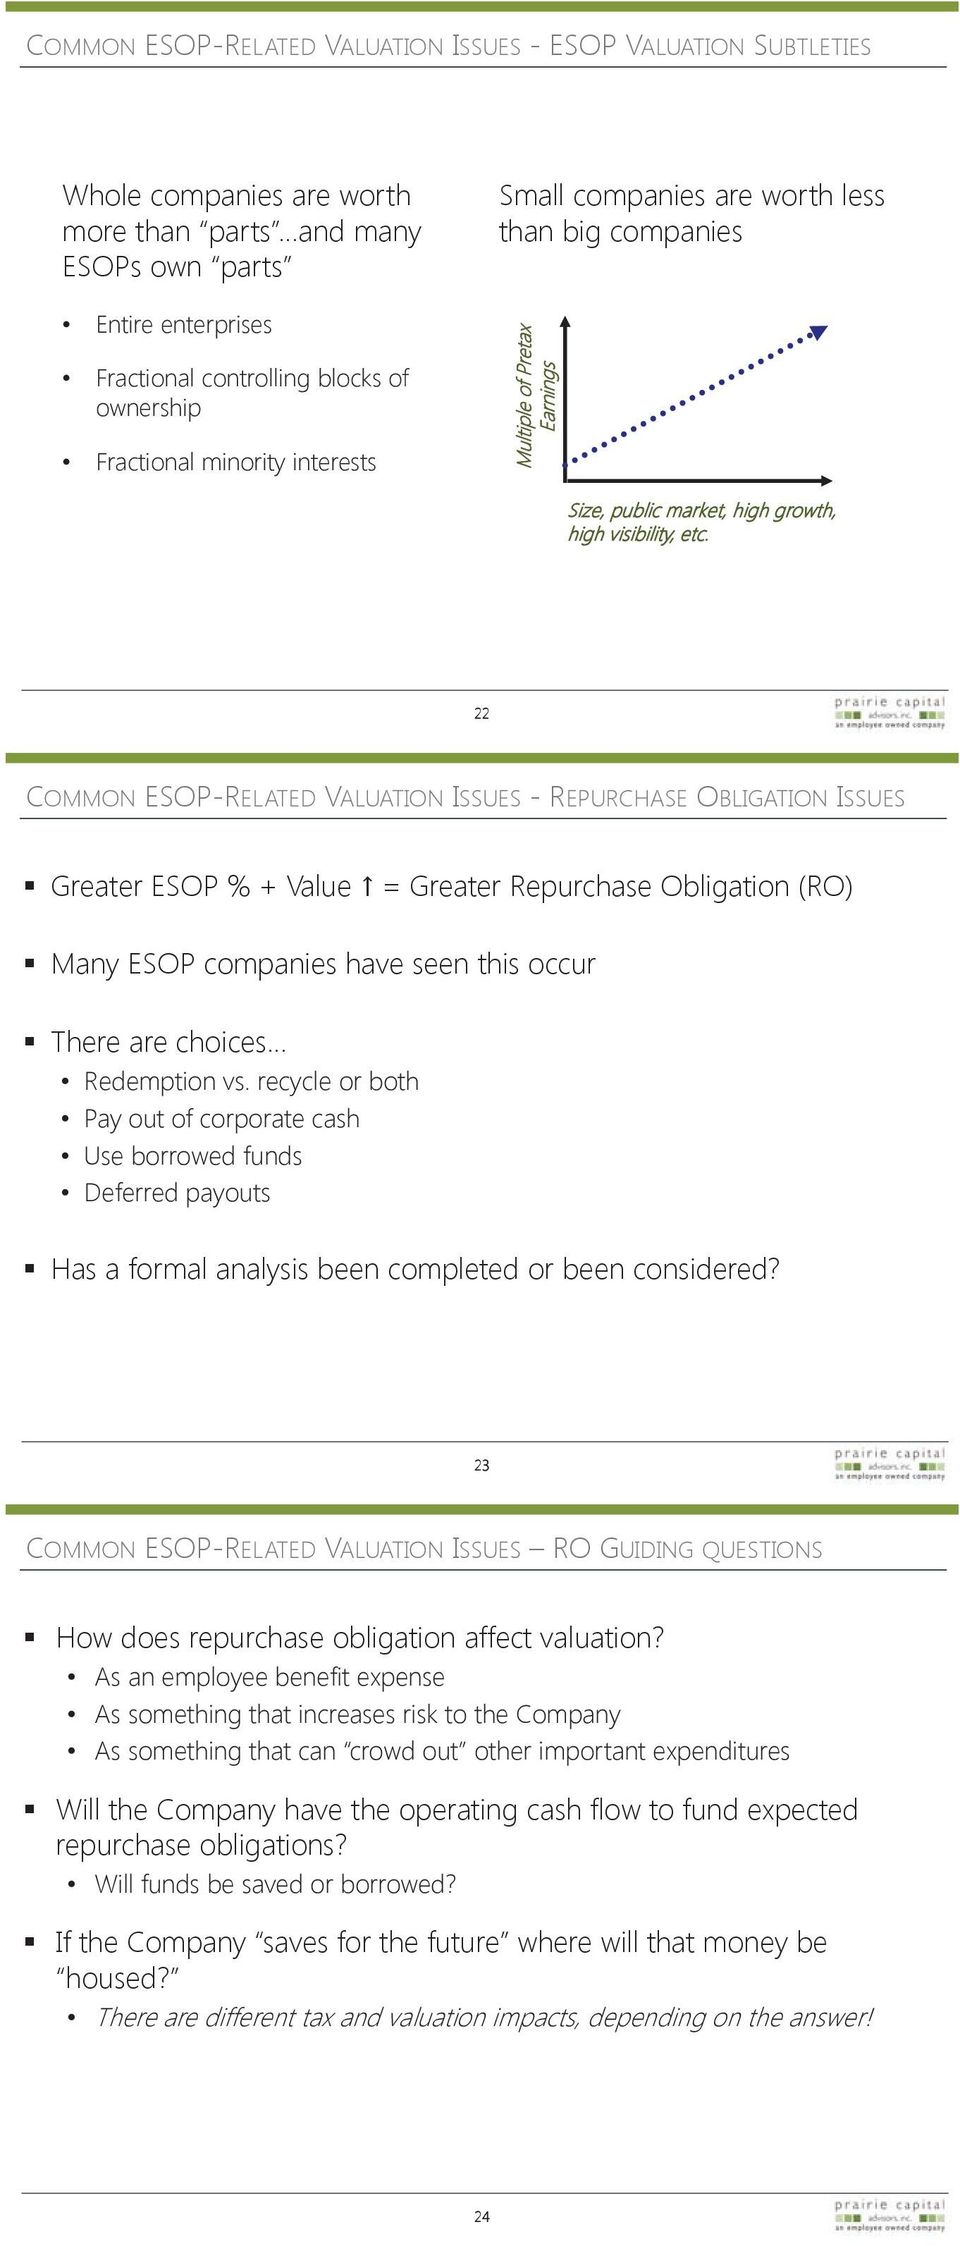 22 COMMON ESOP-RELATED VALUATION ISSUES -REPURCHASE OBLIGATION ISSUES Greater ESOP % + Value = Greater Repurchase Obligation (RO) Many ESOP companies have seen this occur There are choices Redemption